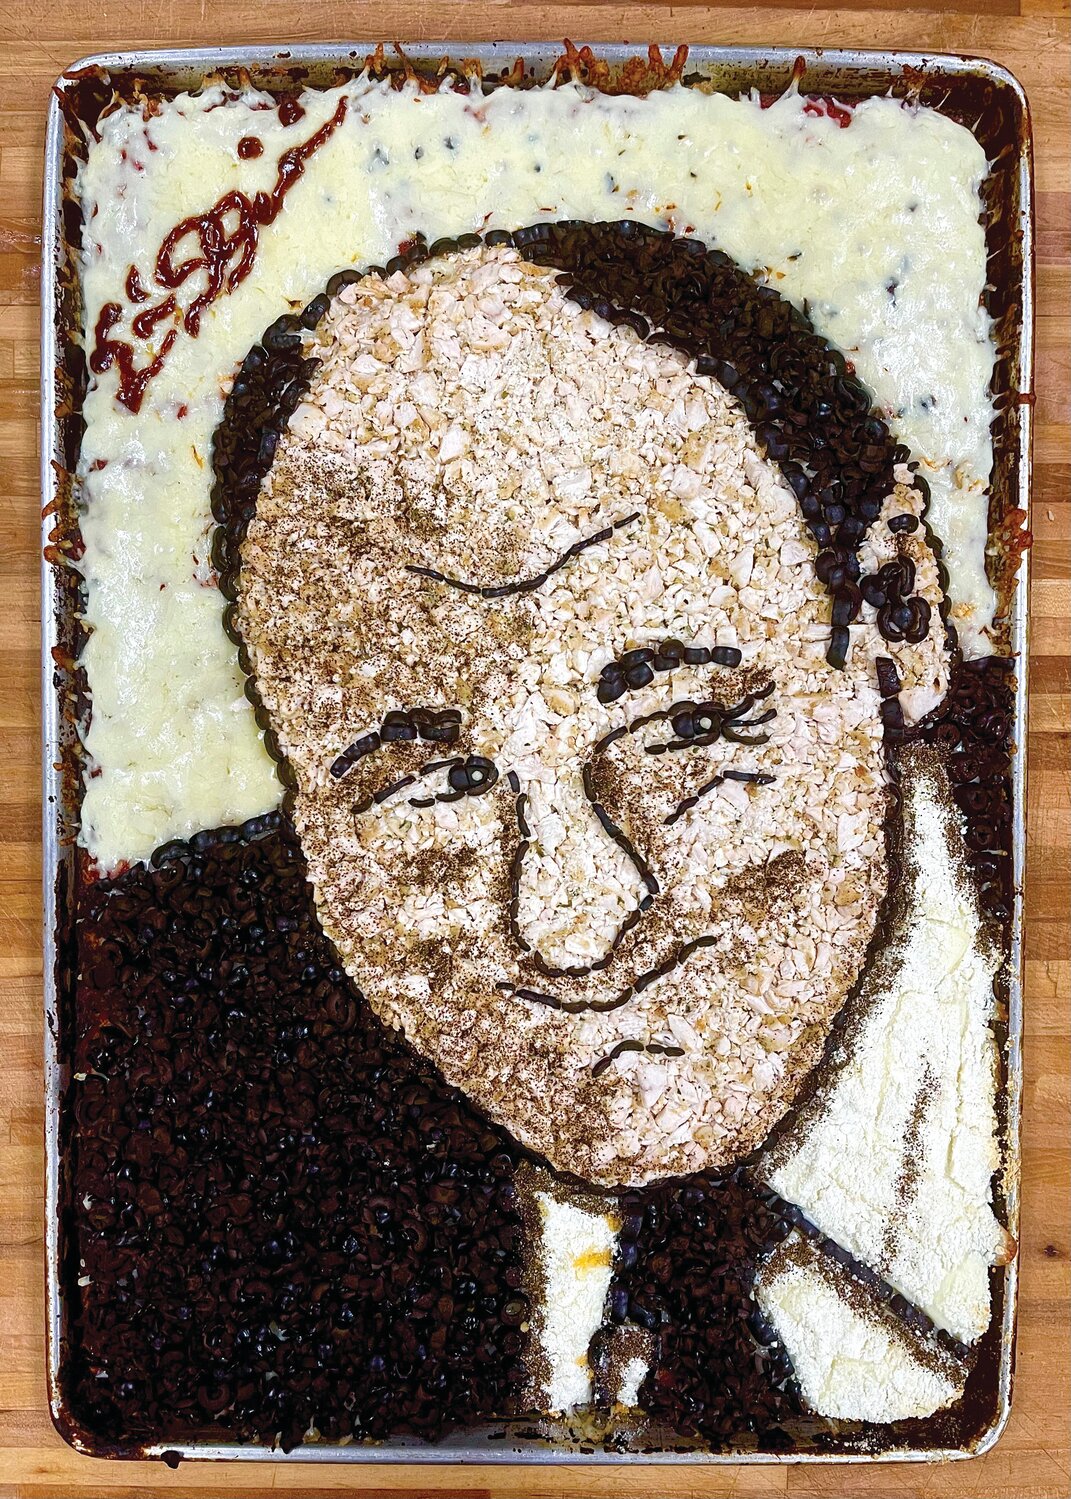 PIZZA ART: Eric Palmieri crafts portraits with pizza. He’s tackled an array of subjects from TV mobster Tony Soprano to pizza reviewer and Barstool Sports magnate Dave Portnoy.